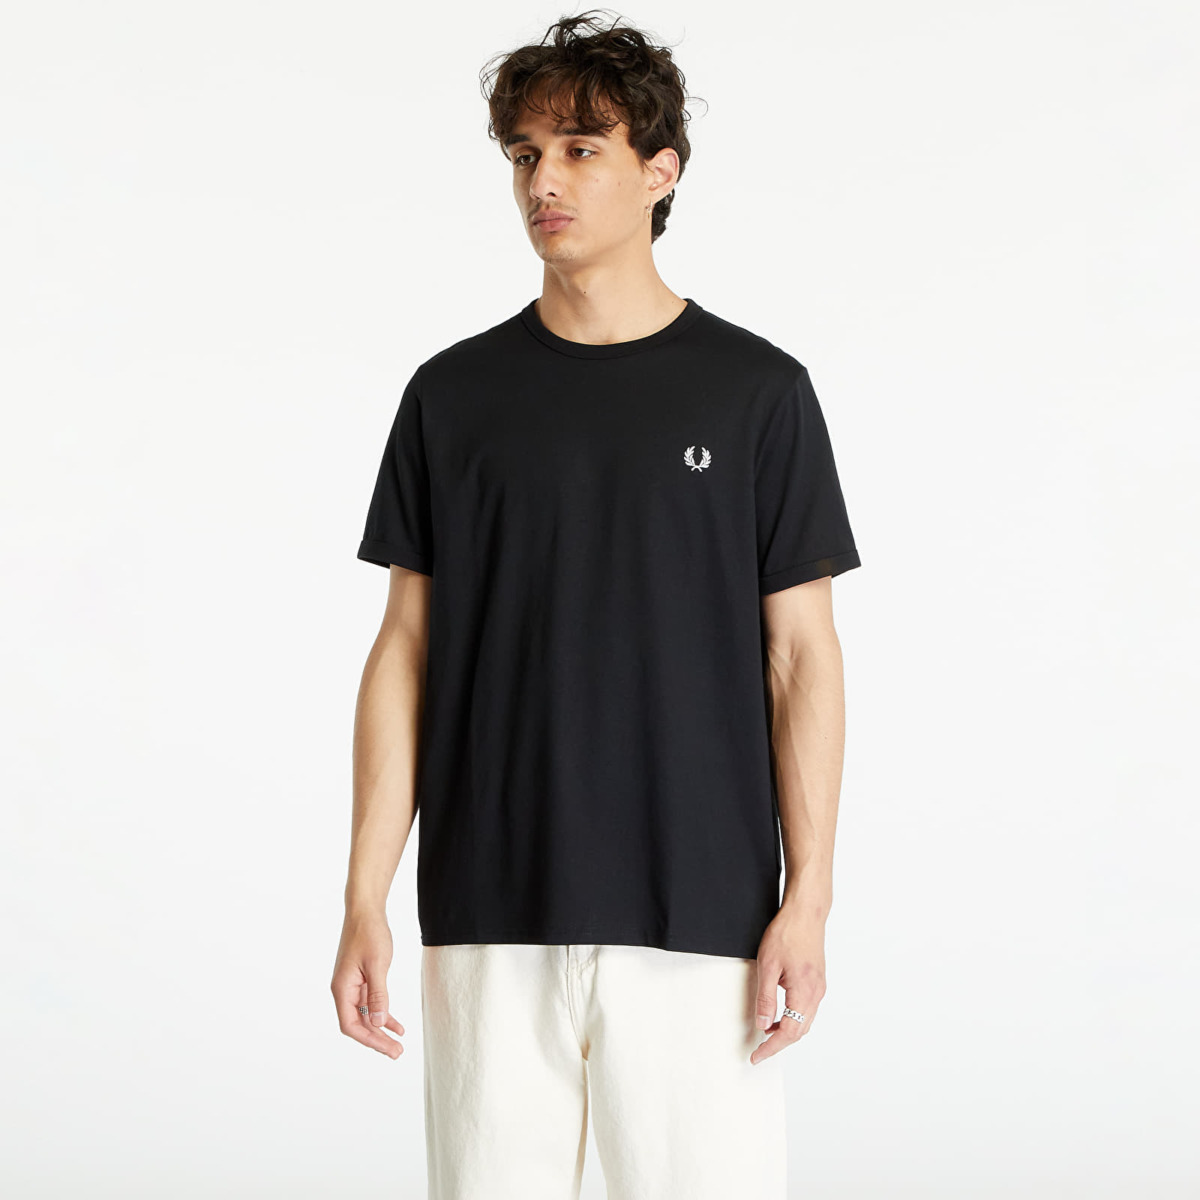 Fred Perry Men's Ringer T-Shirt in Black by Footshop GOOFASH